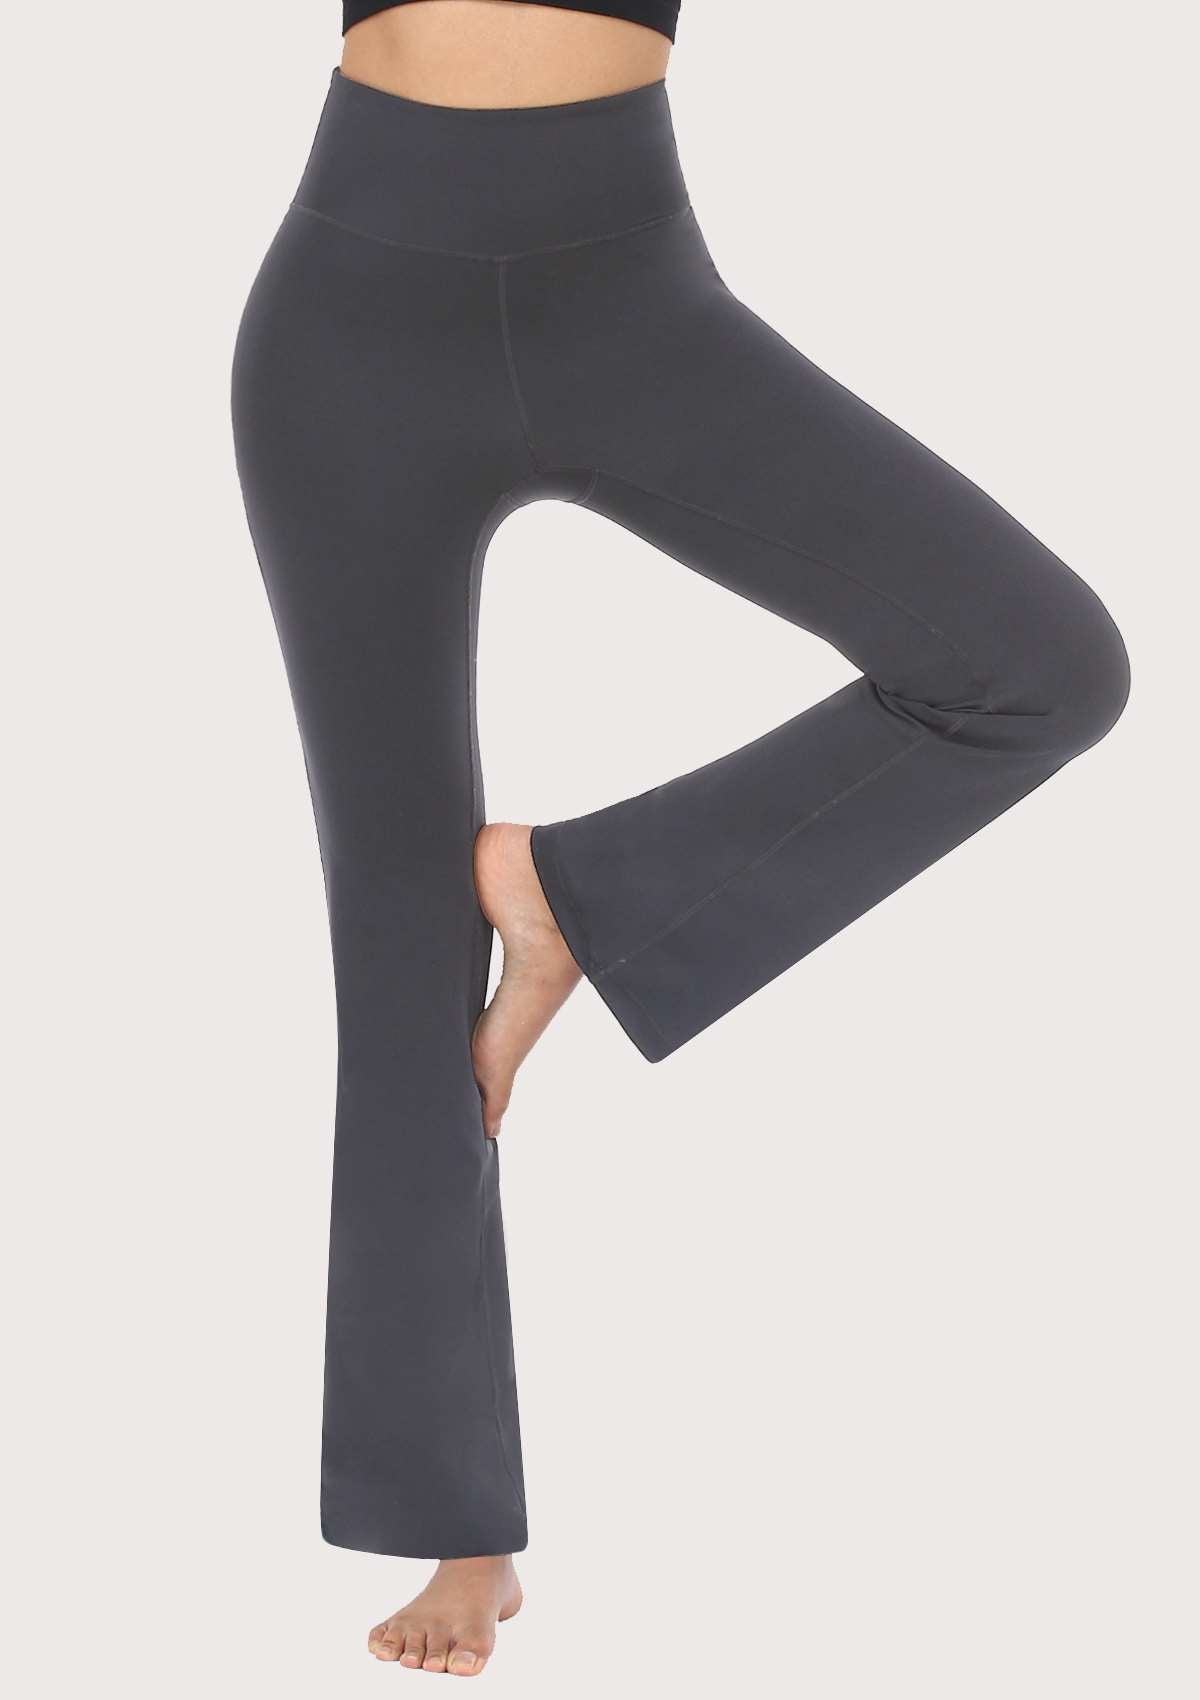 SONGFUL Smooth High Waisted Bootcut Yoga Sports Pants - S / Dark Grey